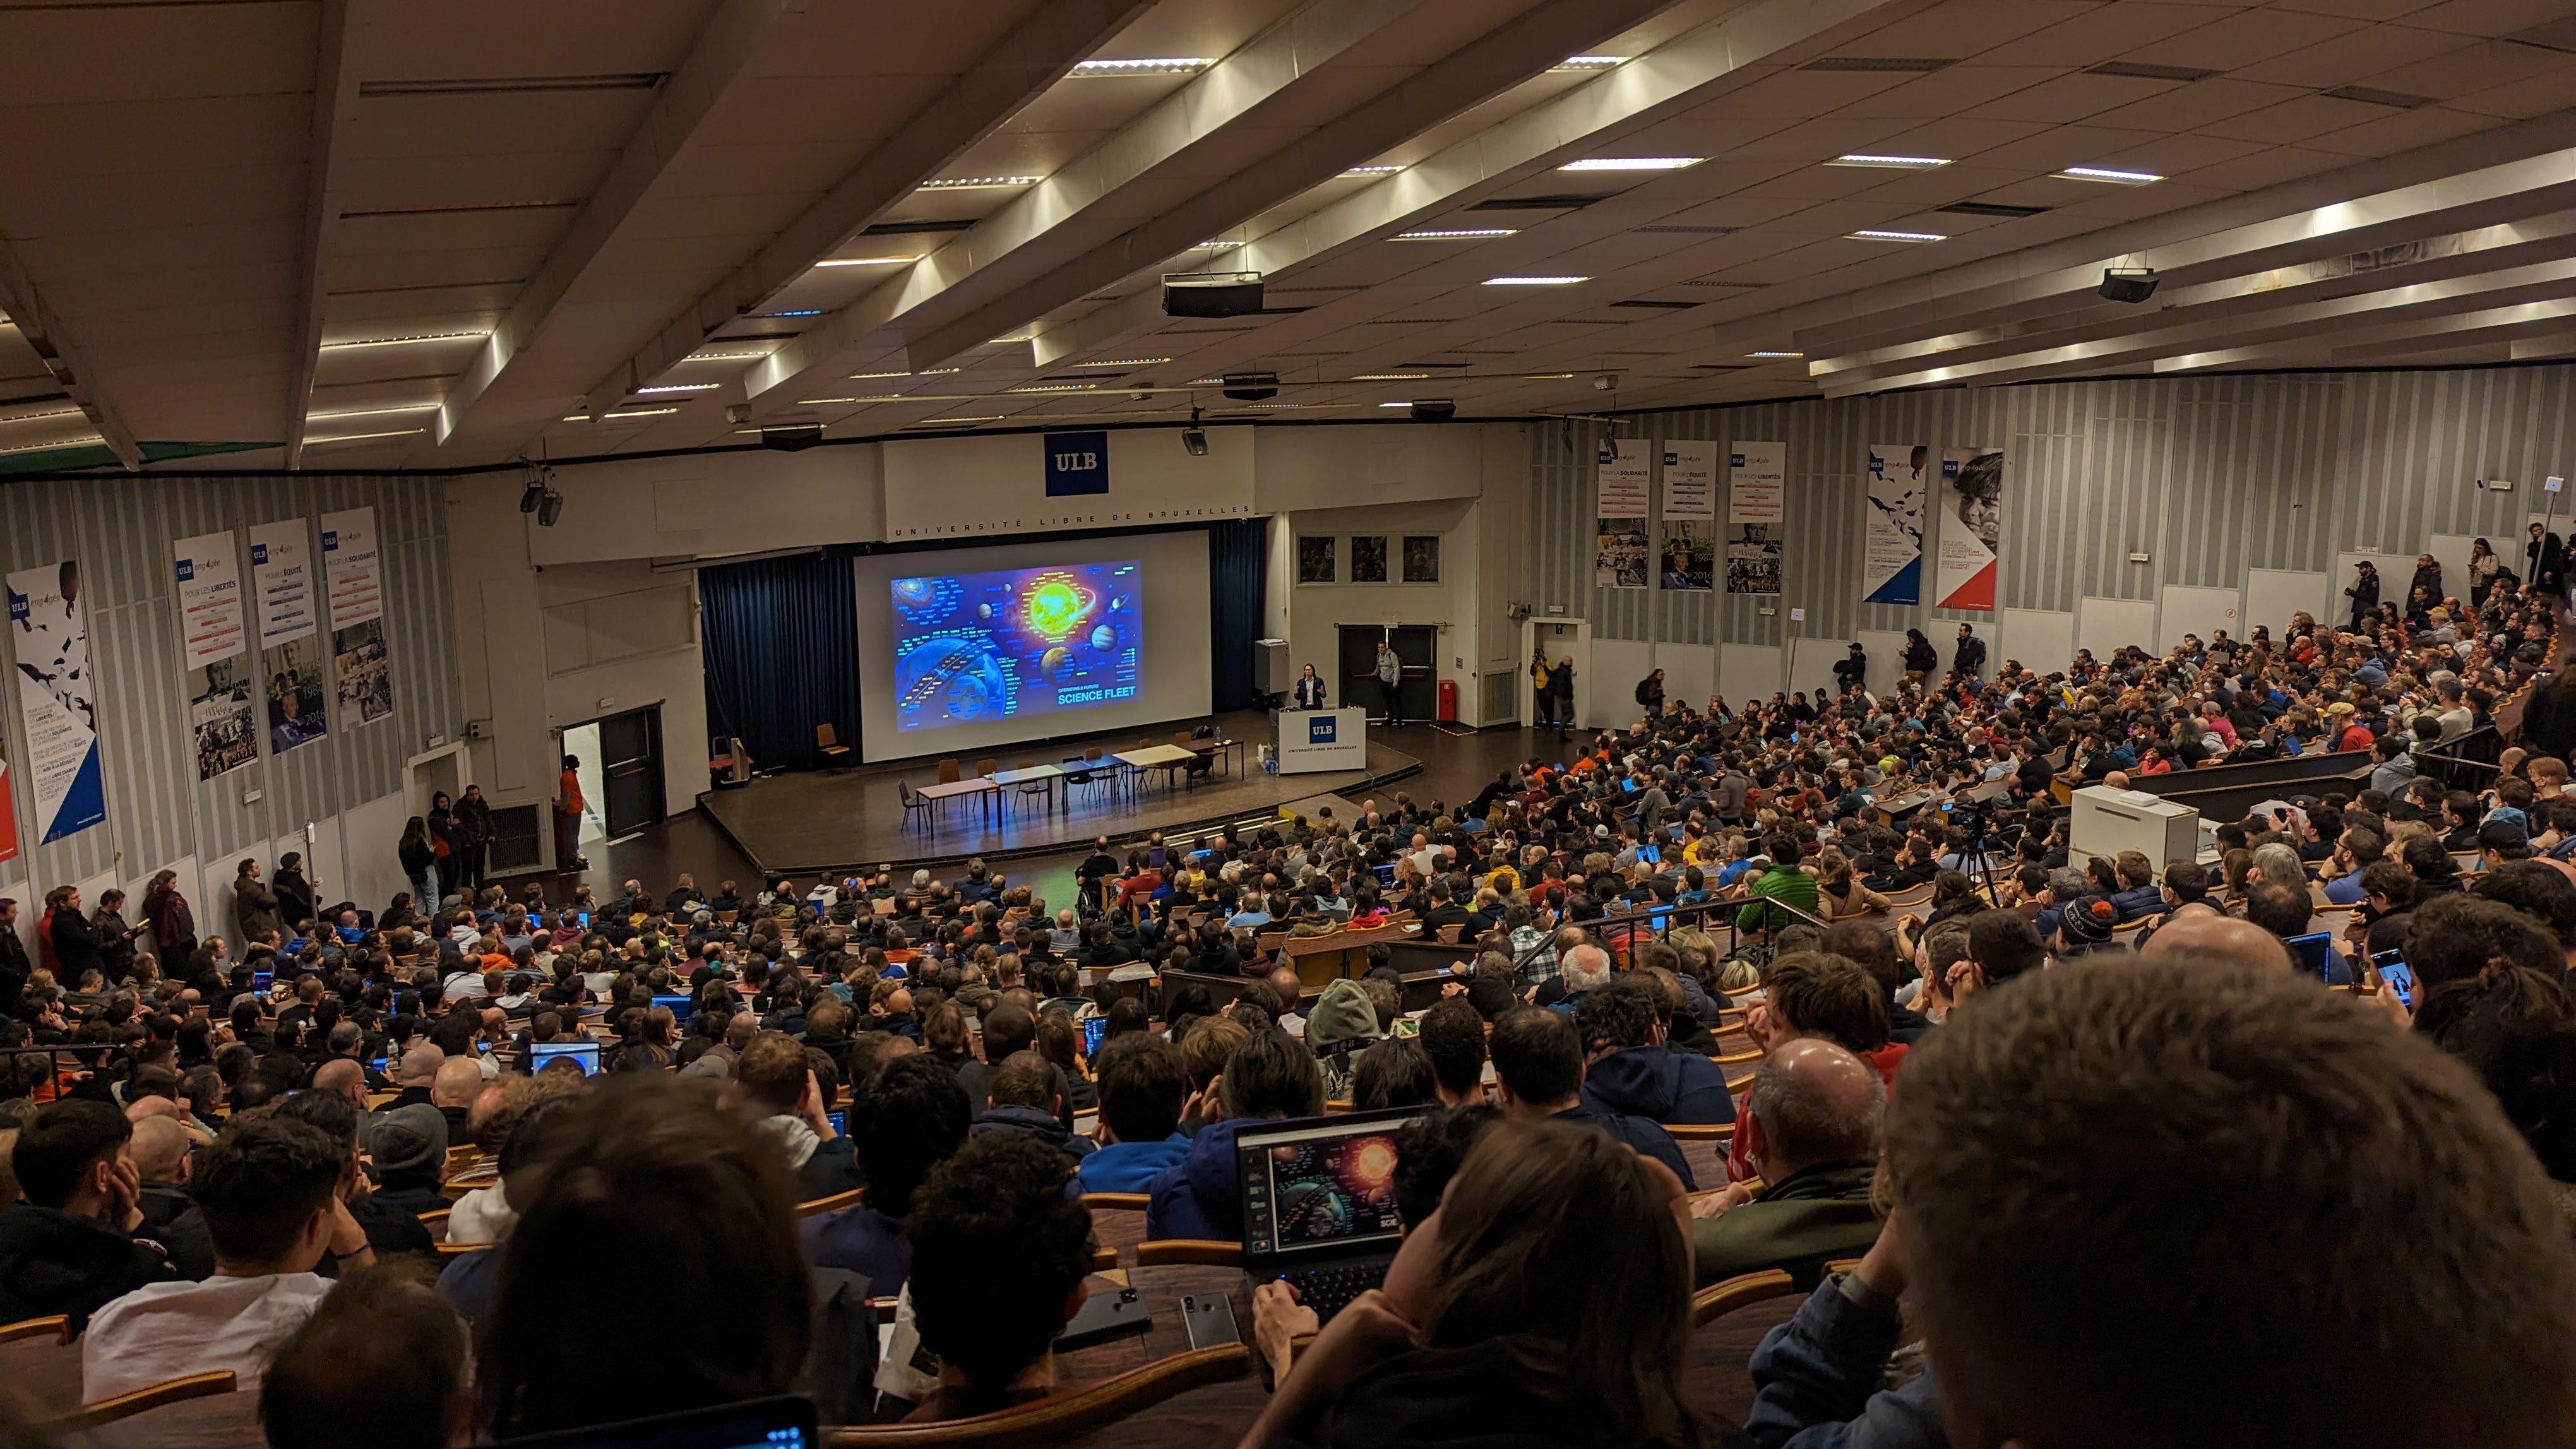 A packed Janson auditorium listening to NASA&rsquo;s Steve Crawford talk